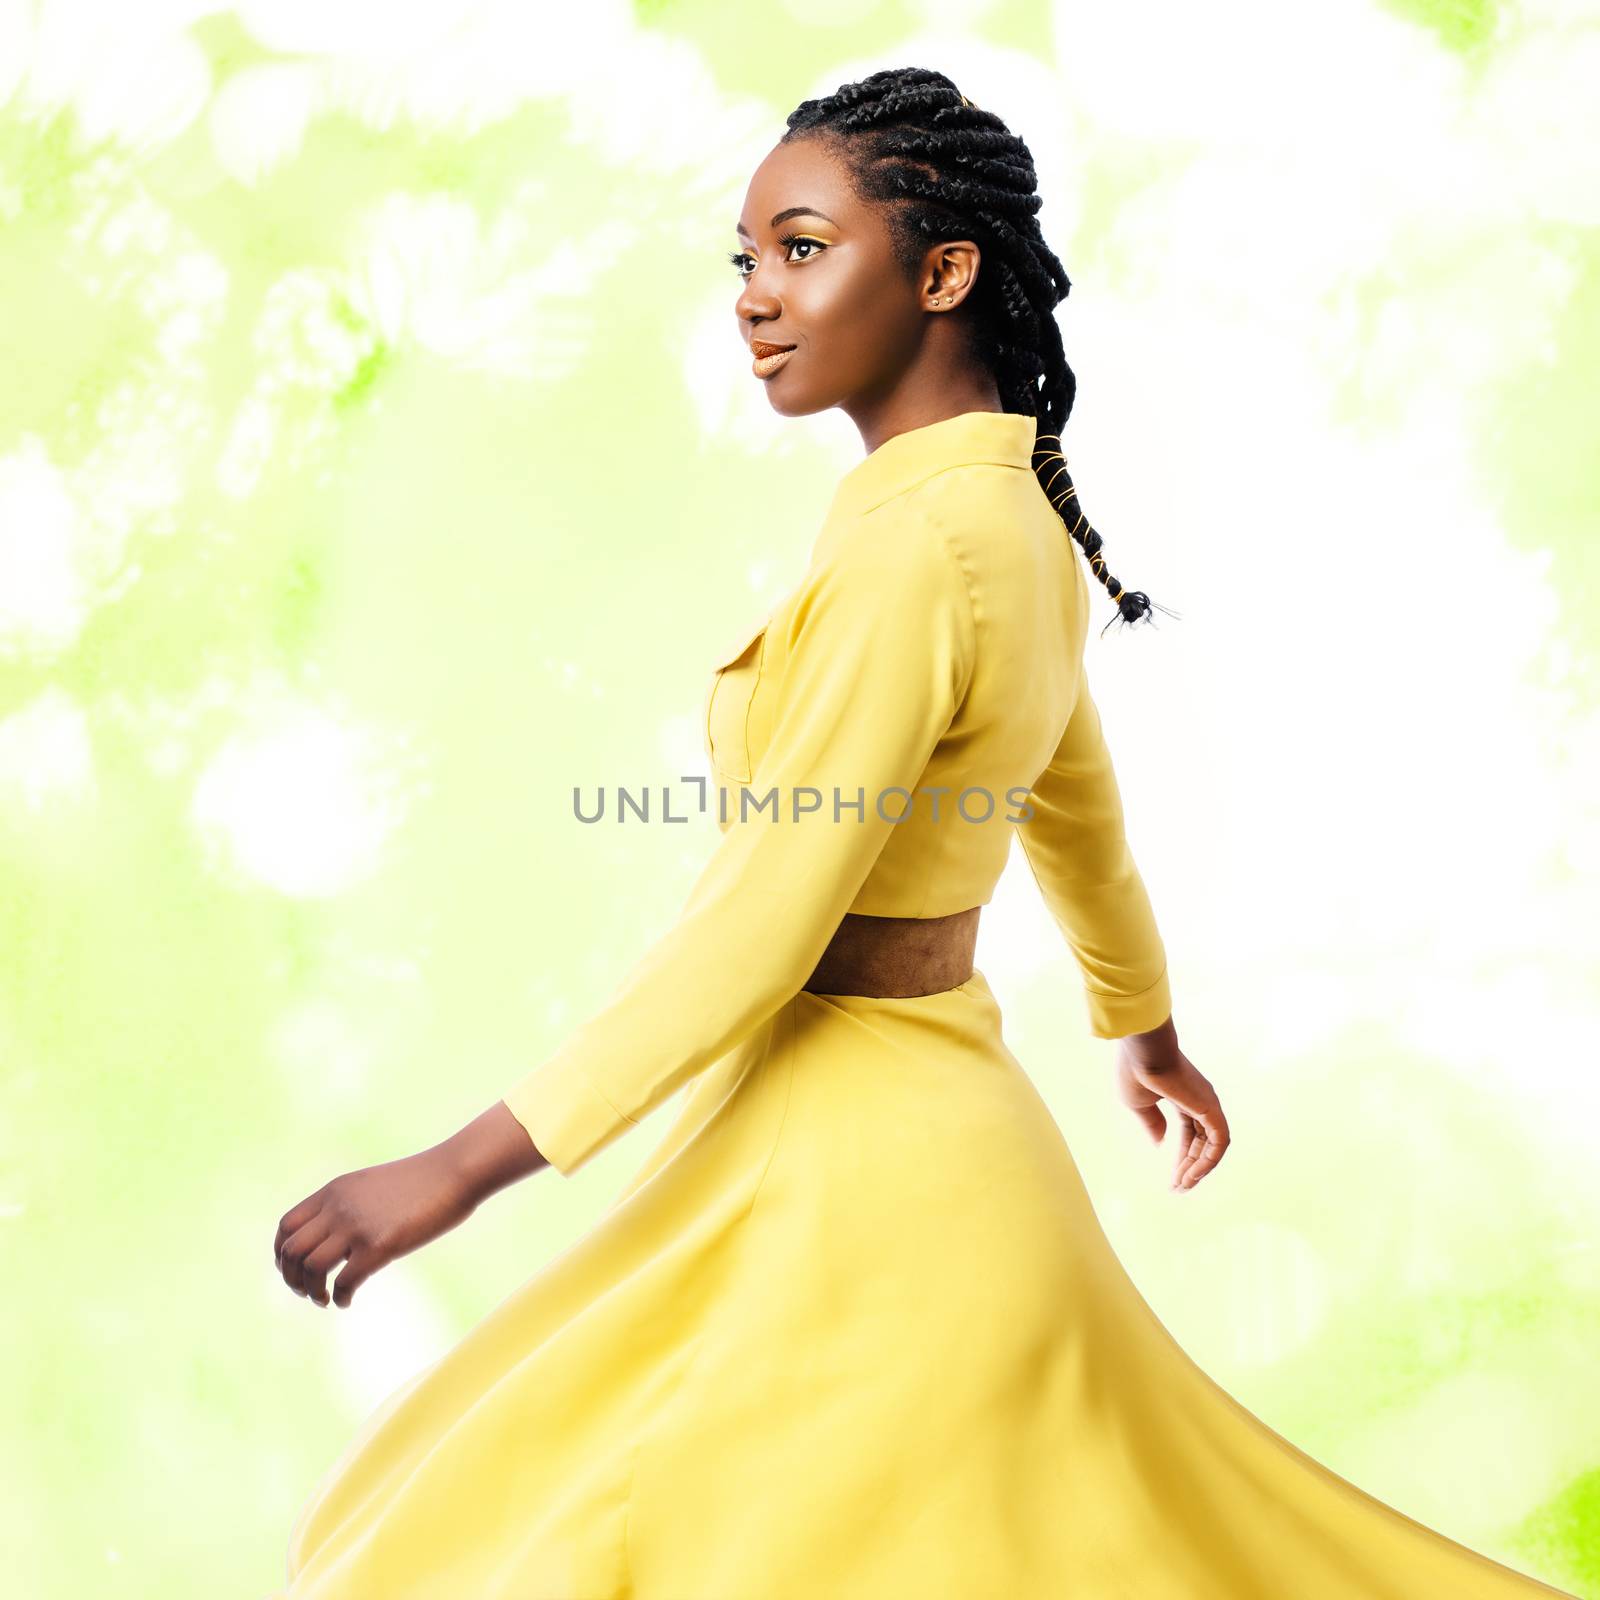 Close up studio portrait of young attractive african woman in yellow dress.Girl with braided hairstyle swaying silky dress against colorful green background.